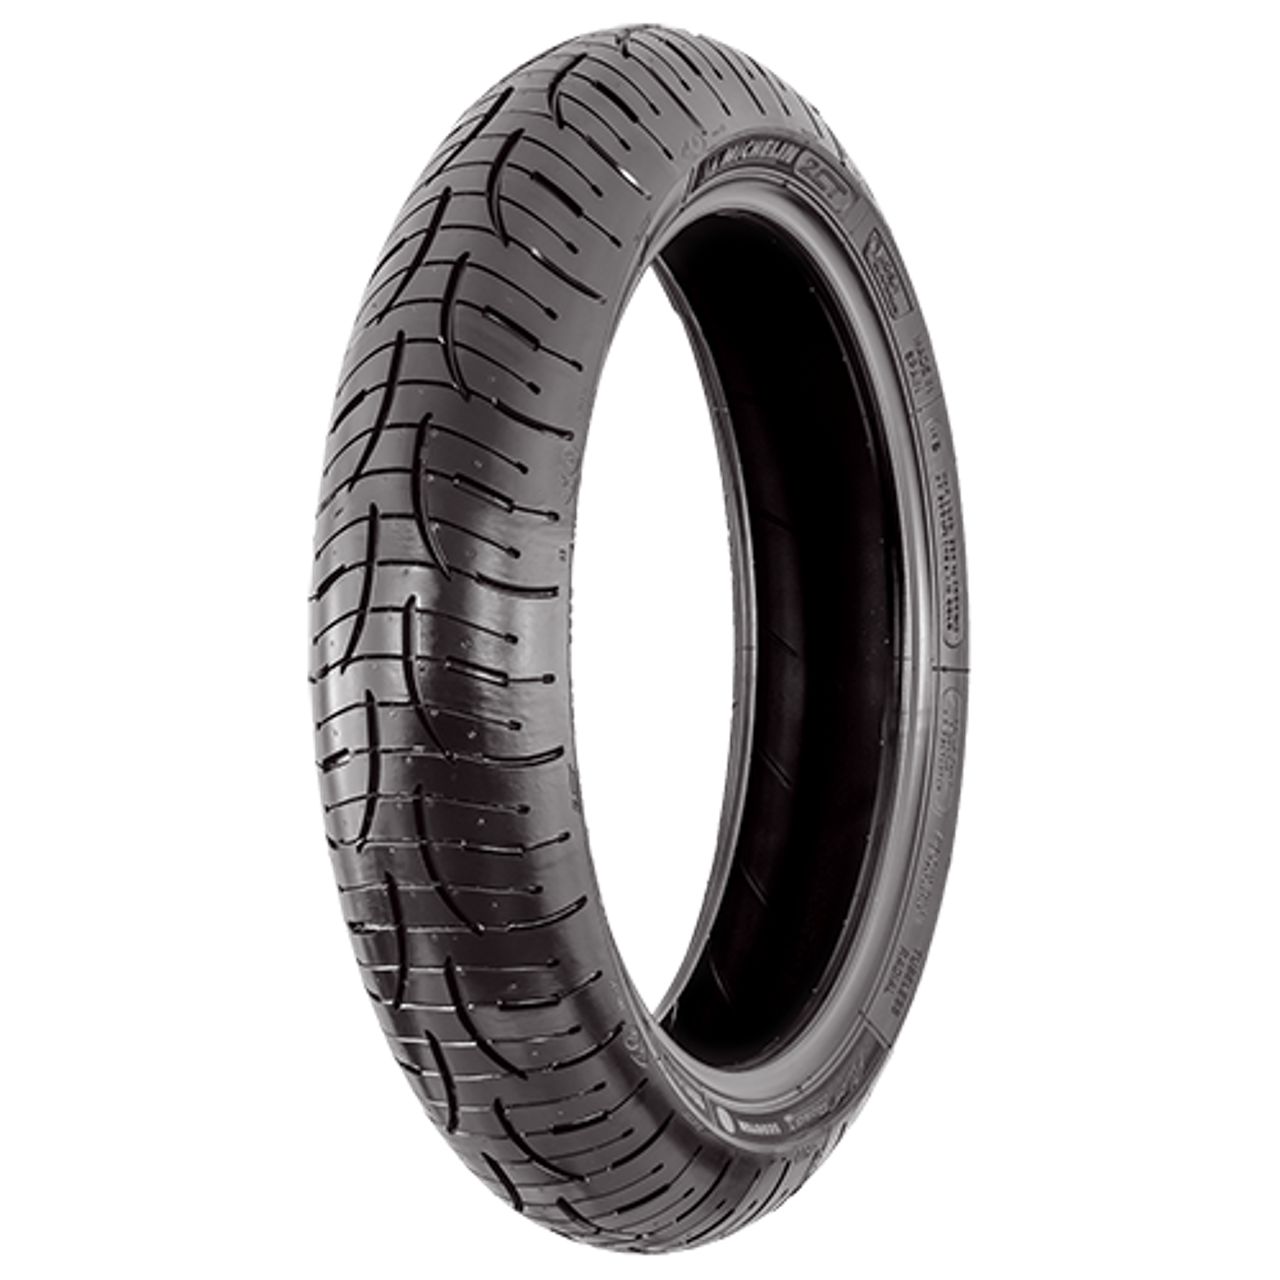 MICHELIN PILOT ROAD 4 SCOOTER 120/70 R15 M/C TL 56H FRONT